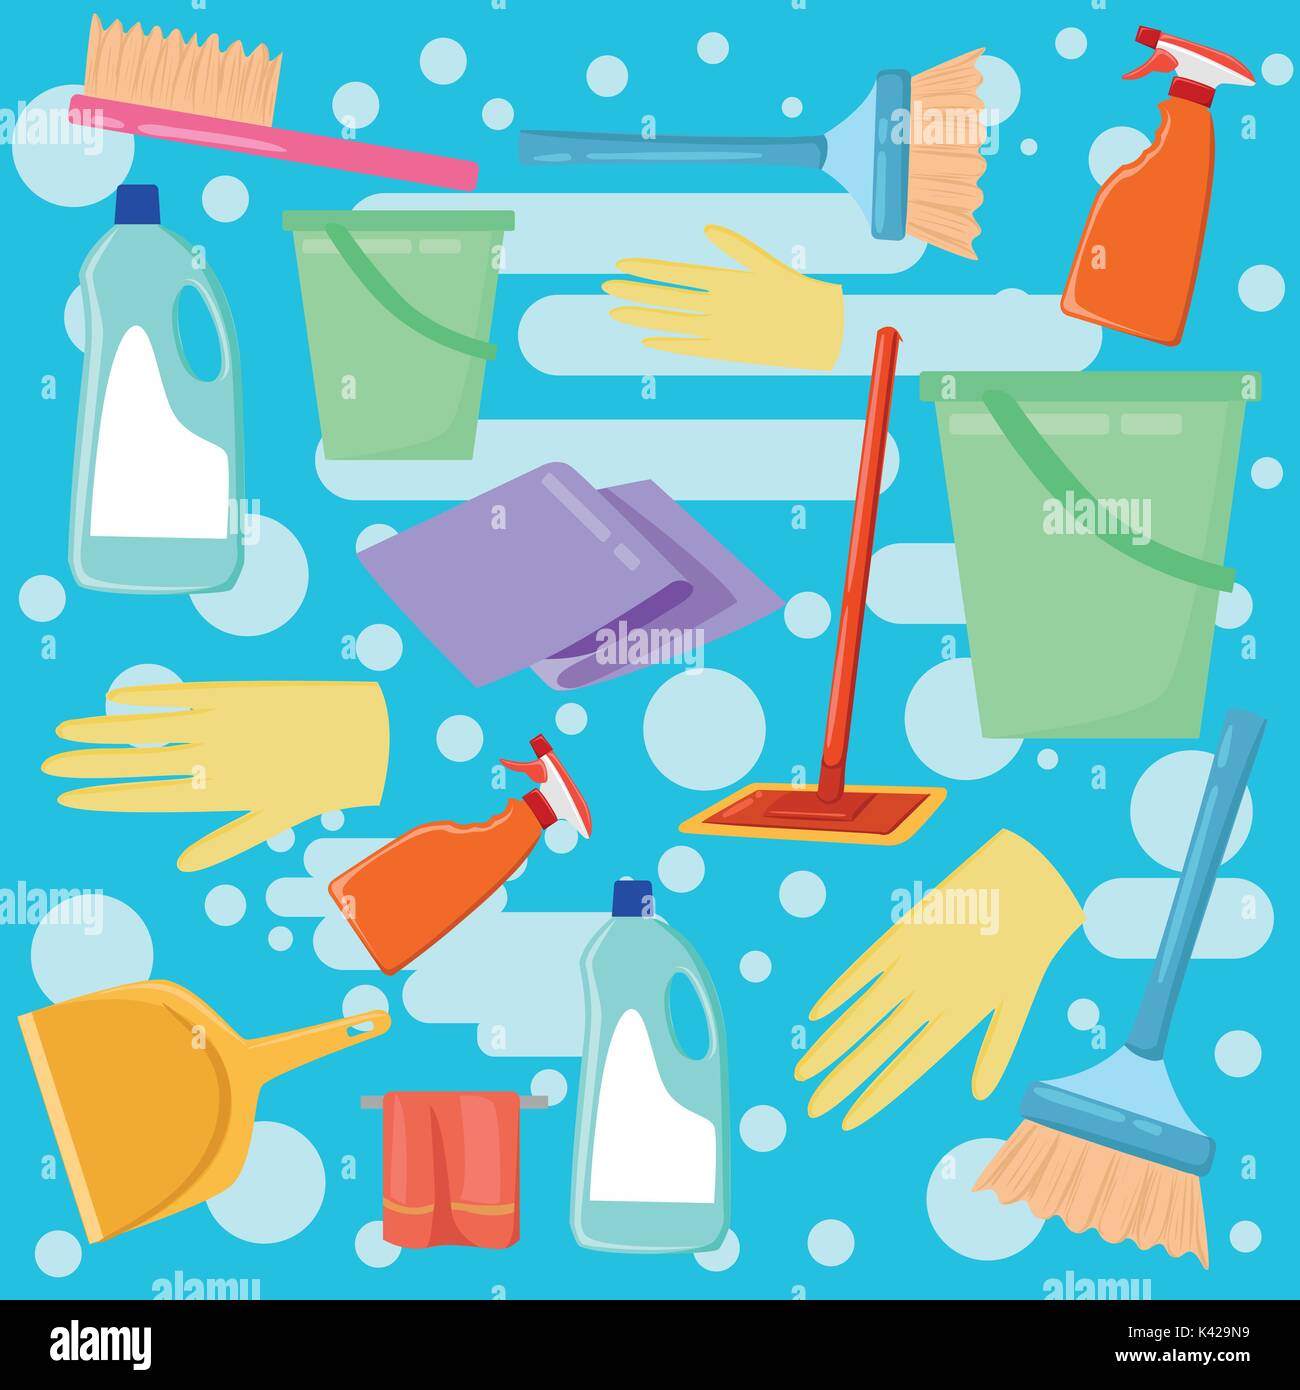 Detergents vector set. Cleaning tools vector set. Detergents for cleaning home. Household supplies and cleaning flat icons Stock Vector